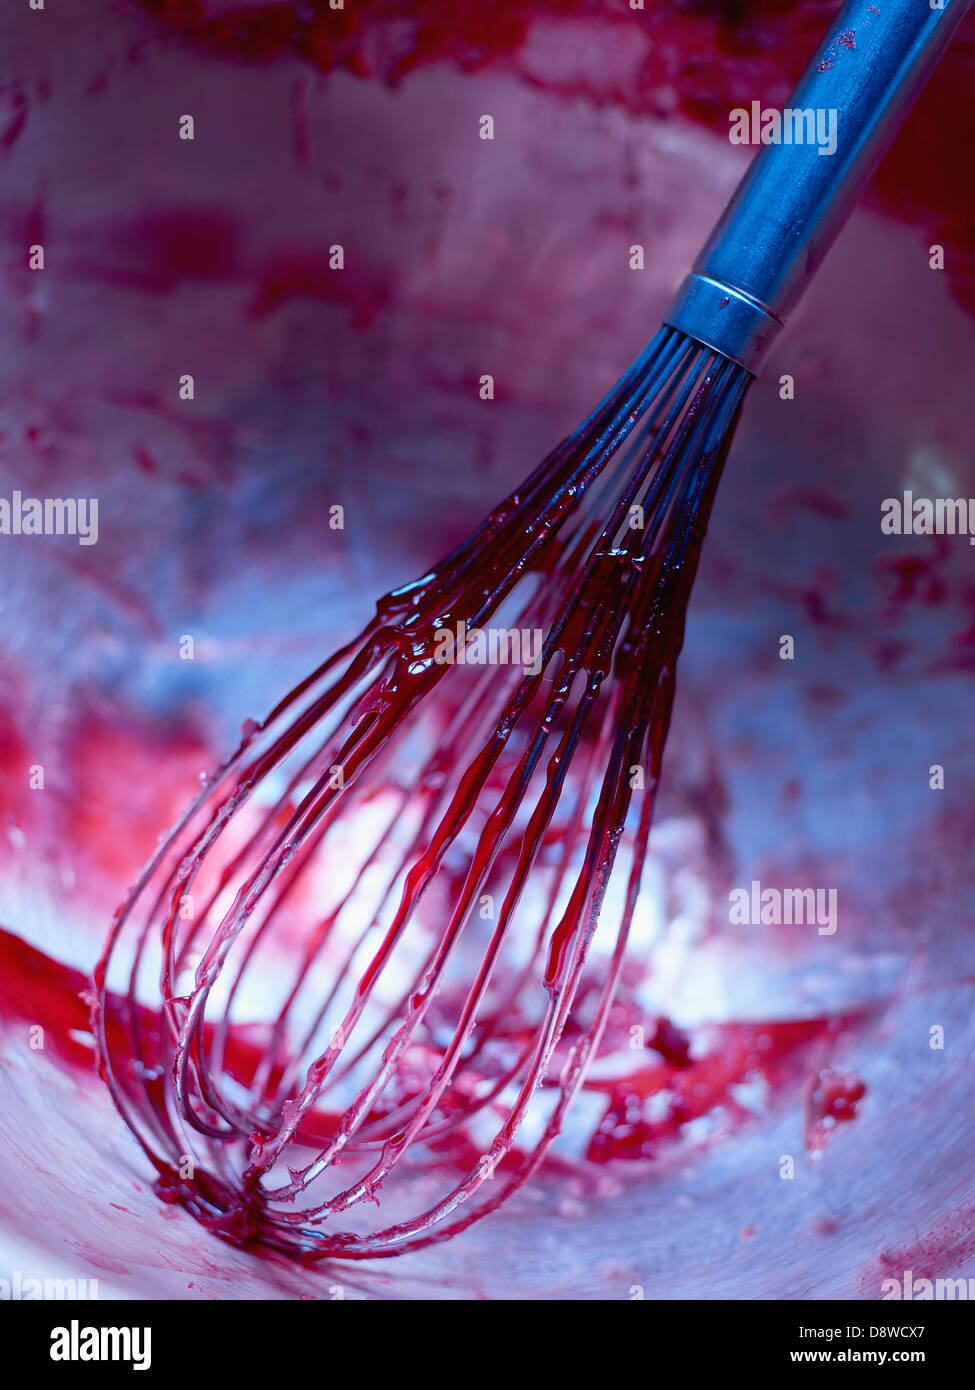 Whisk covered in sugar,fruit pulp and pectin Stock Photo